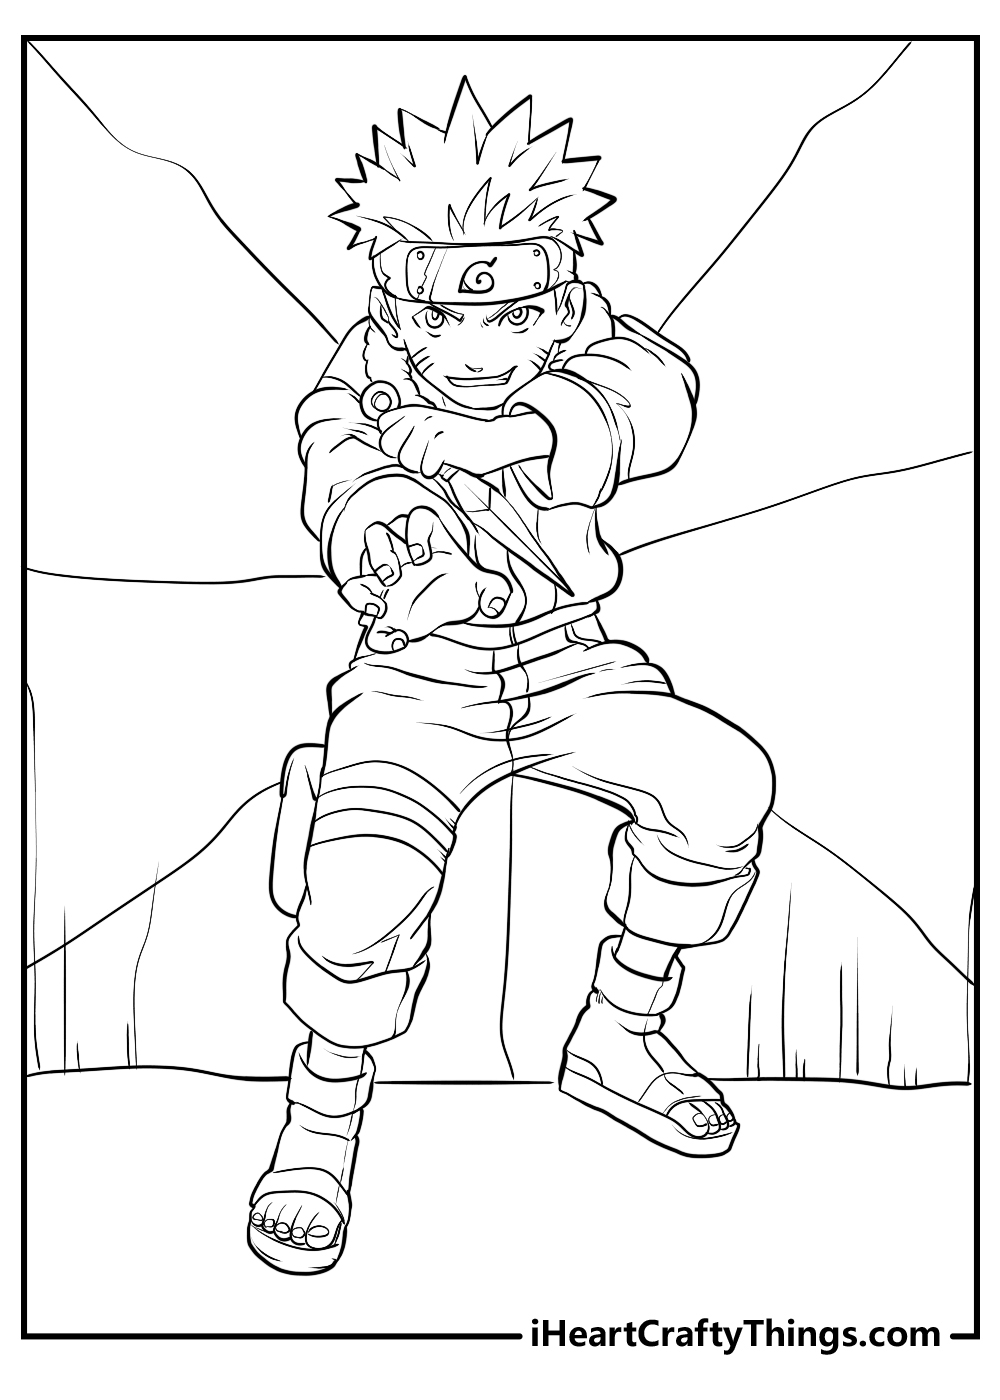 Free Printable Naruto Coloring Pages For Kids  Cartoon coloring pages,  Coloring pages, Naruto sketch drawing